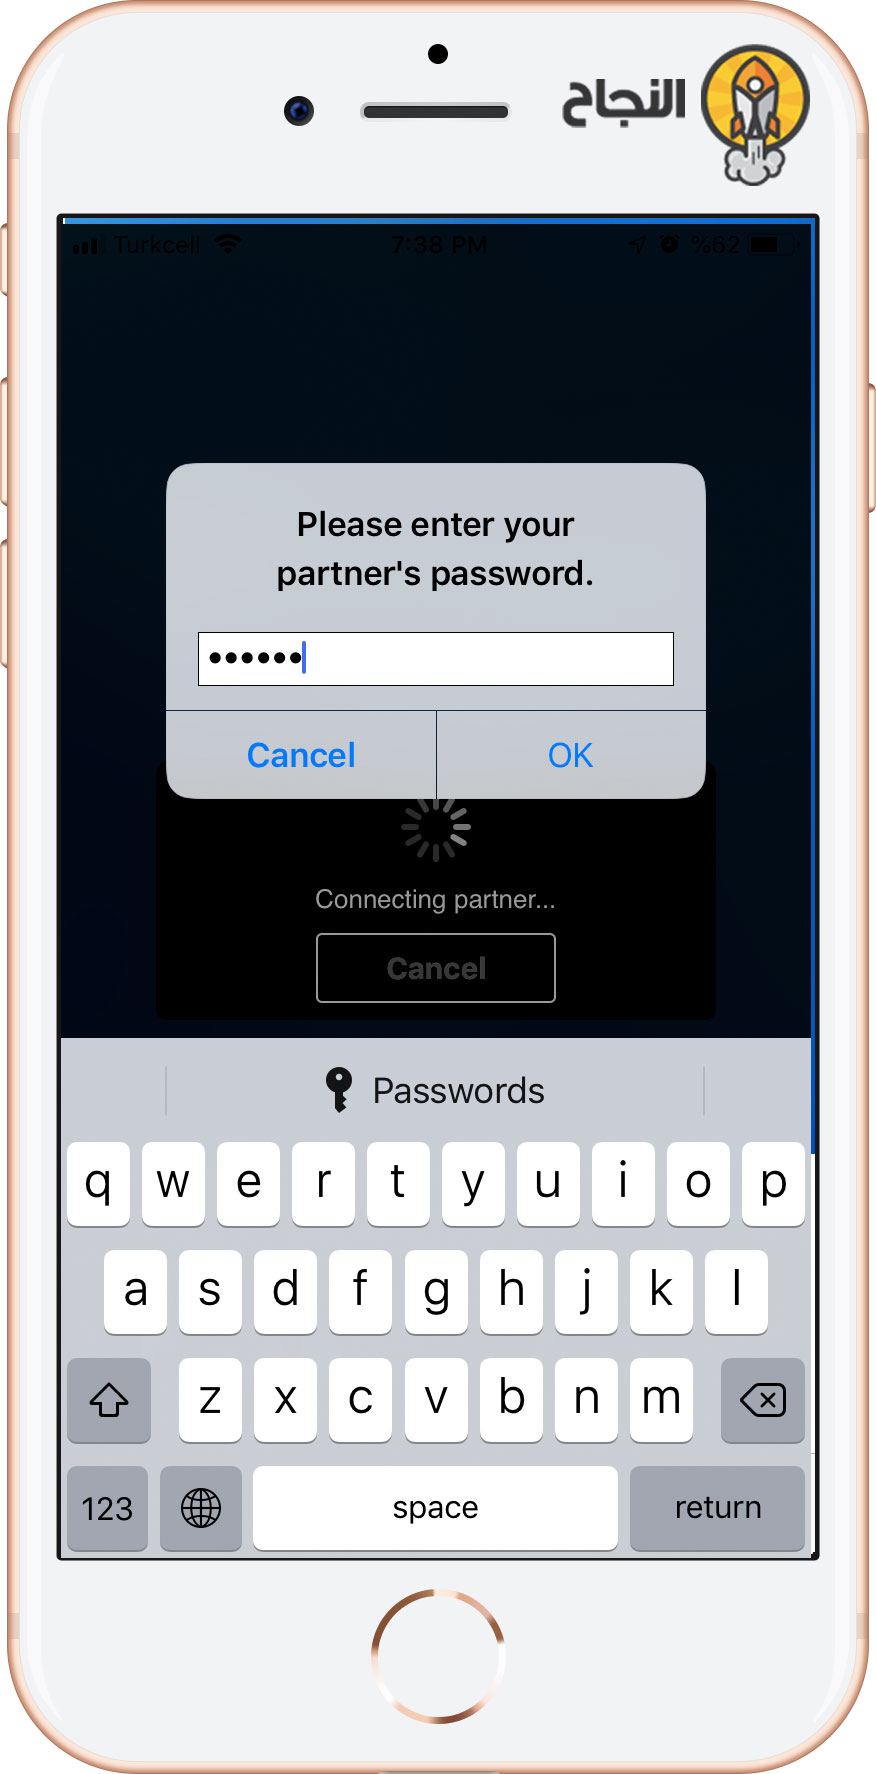 Request for the password